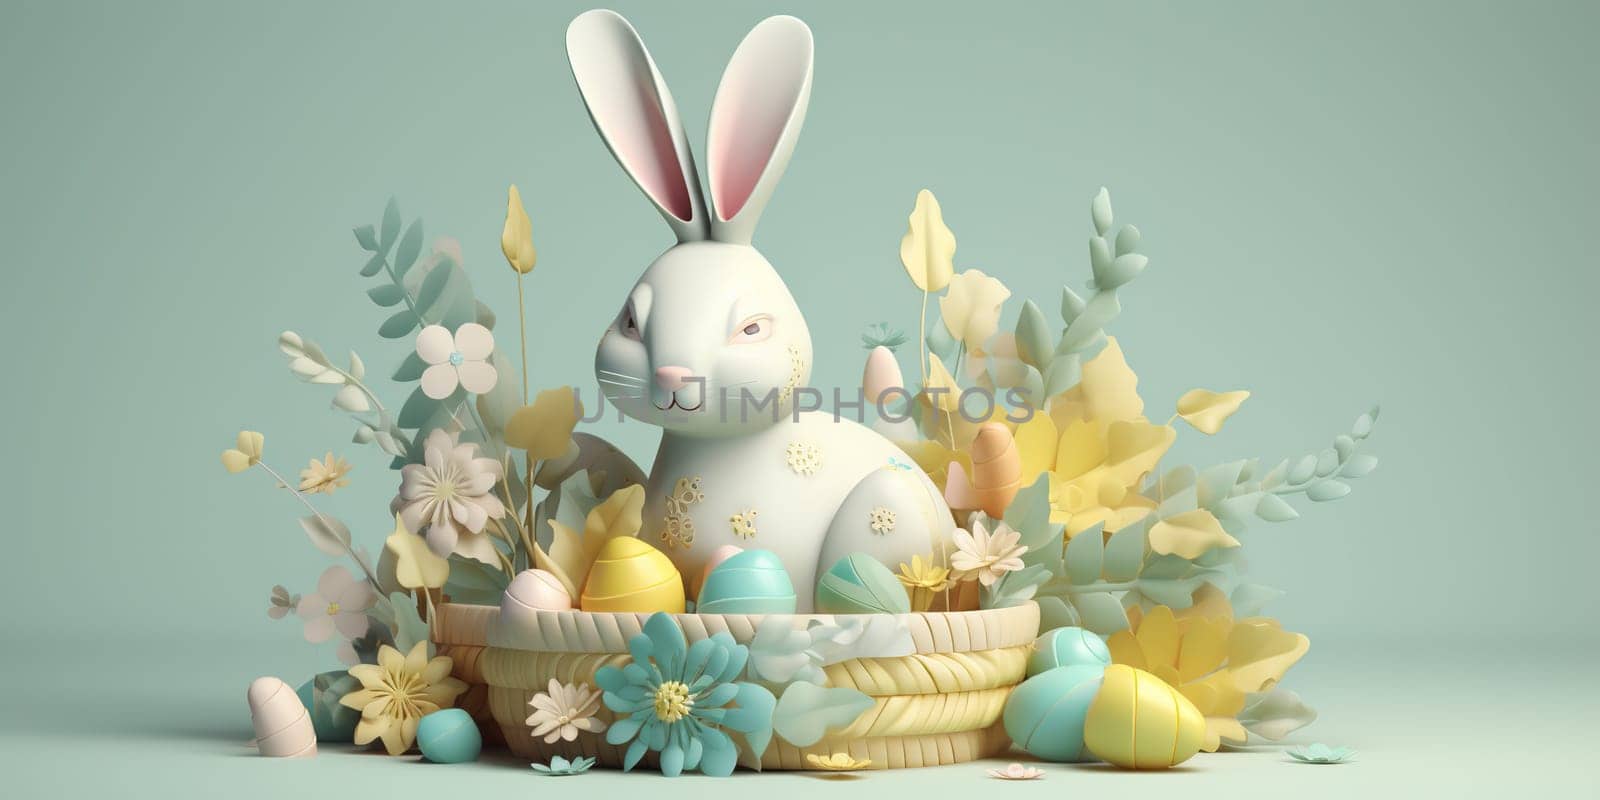 Quilling Colorful Paper Flowers And Easter Rabbit by tan4ikk1